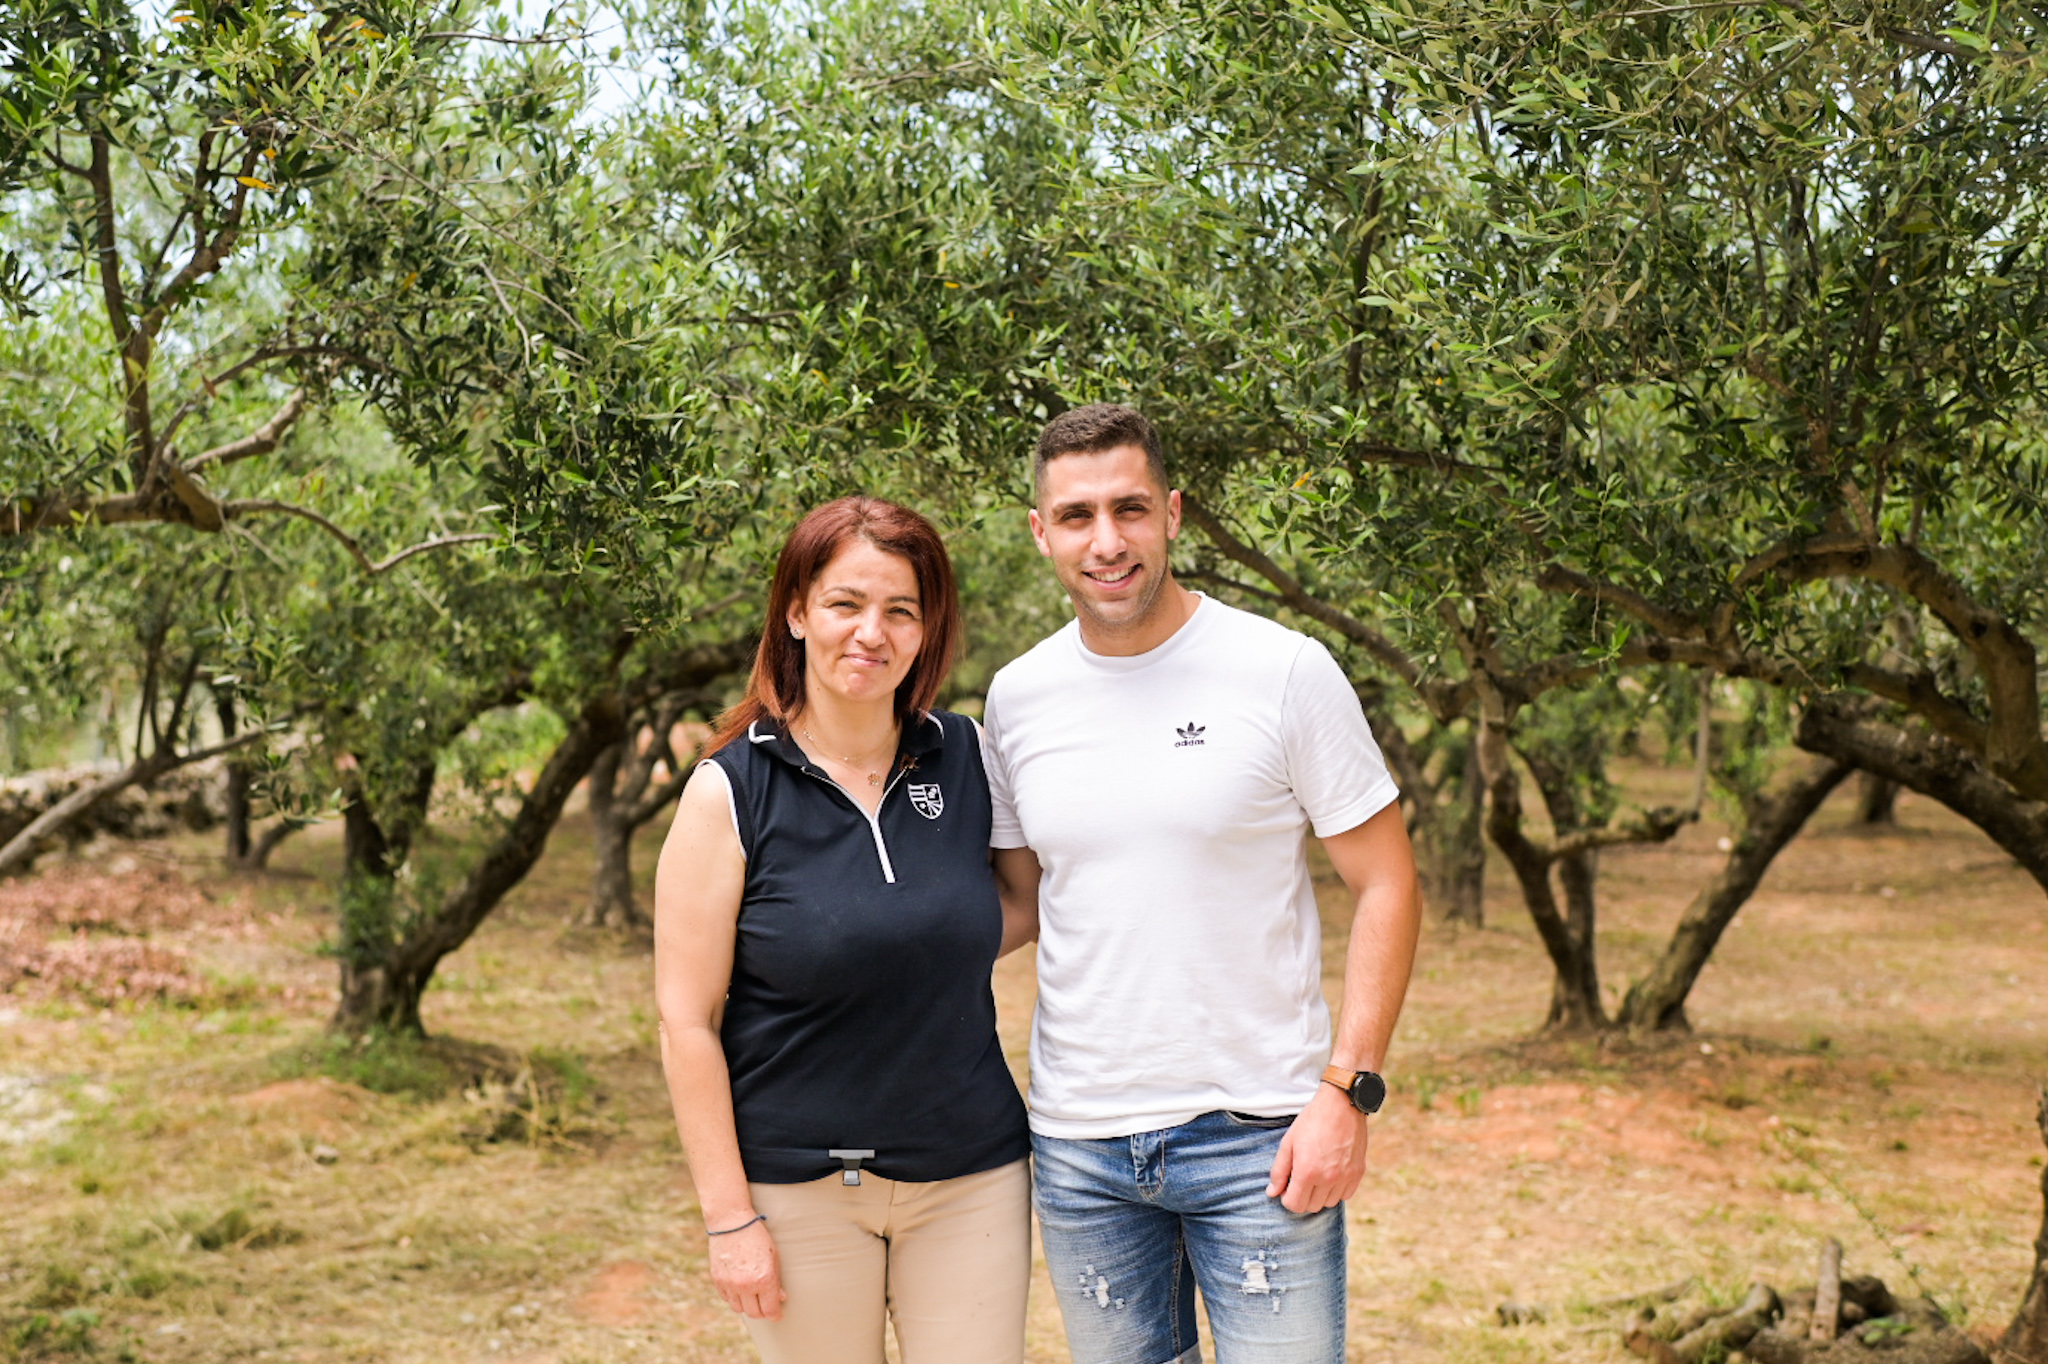 Veerna with her son, in front of her brother's olive trees